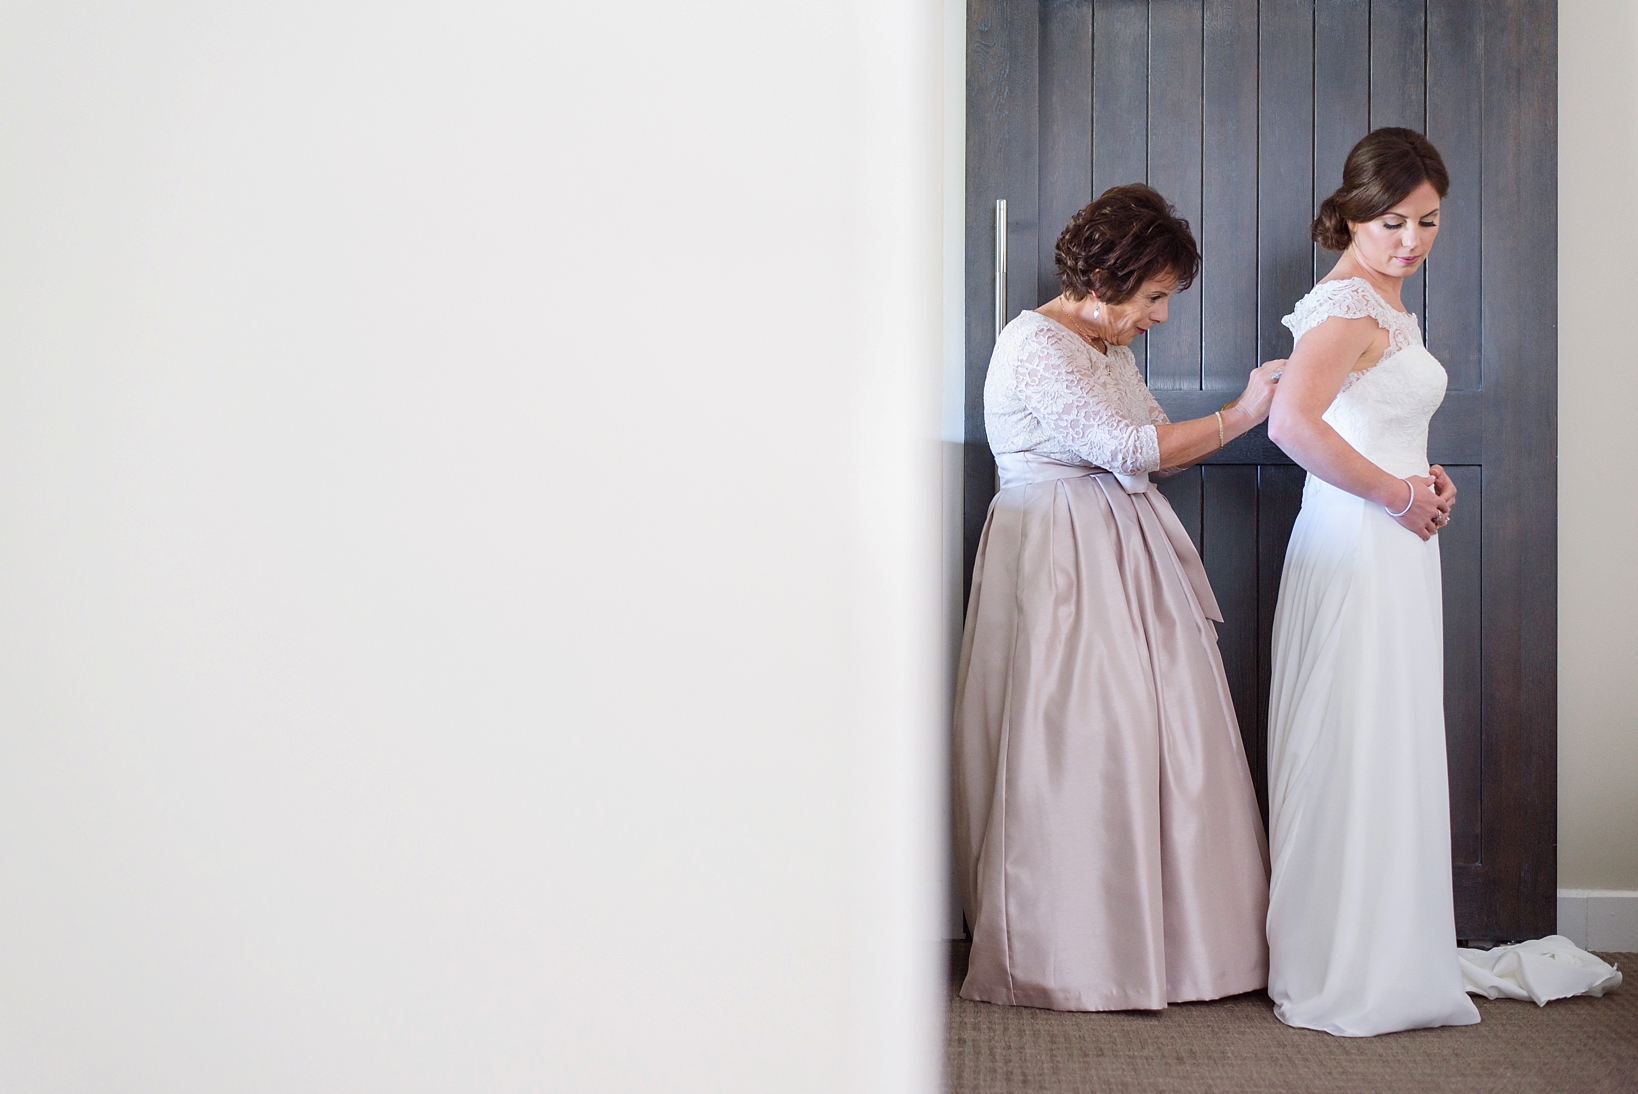 Bride being helped into her dress by her mother